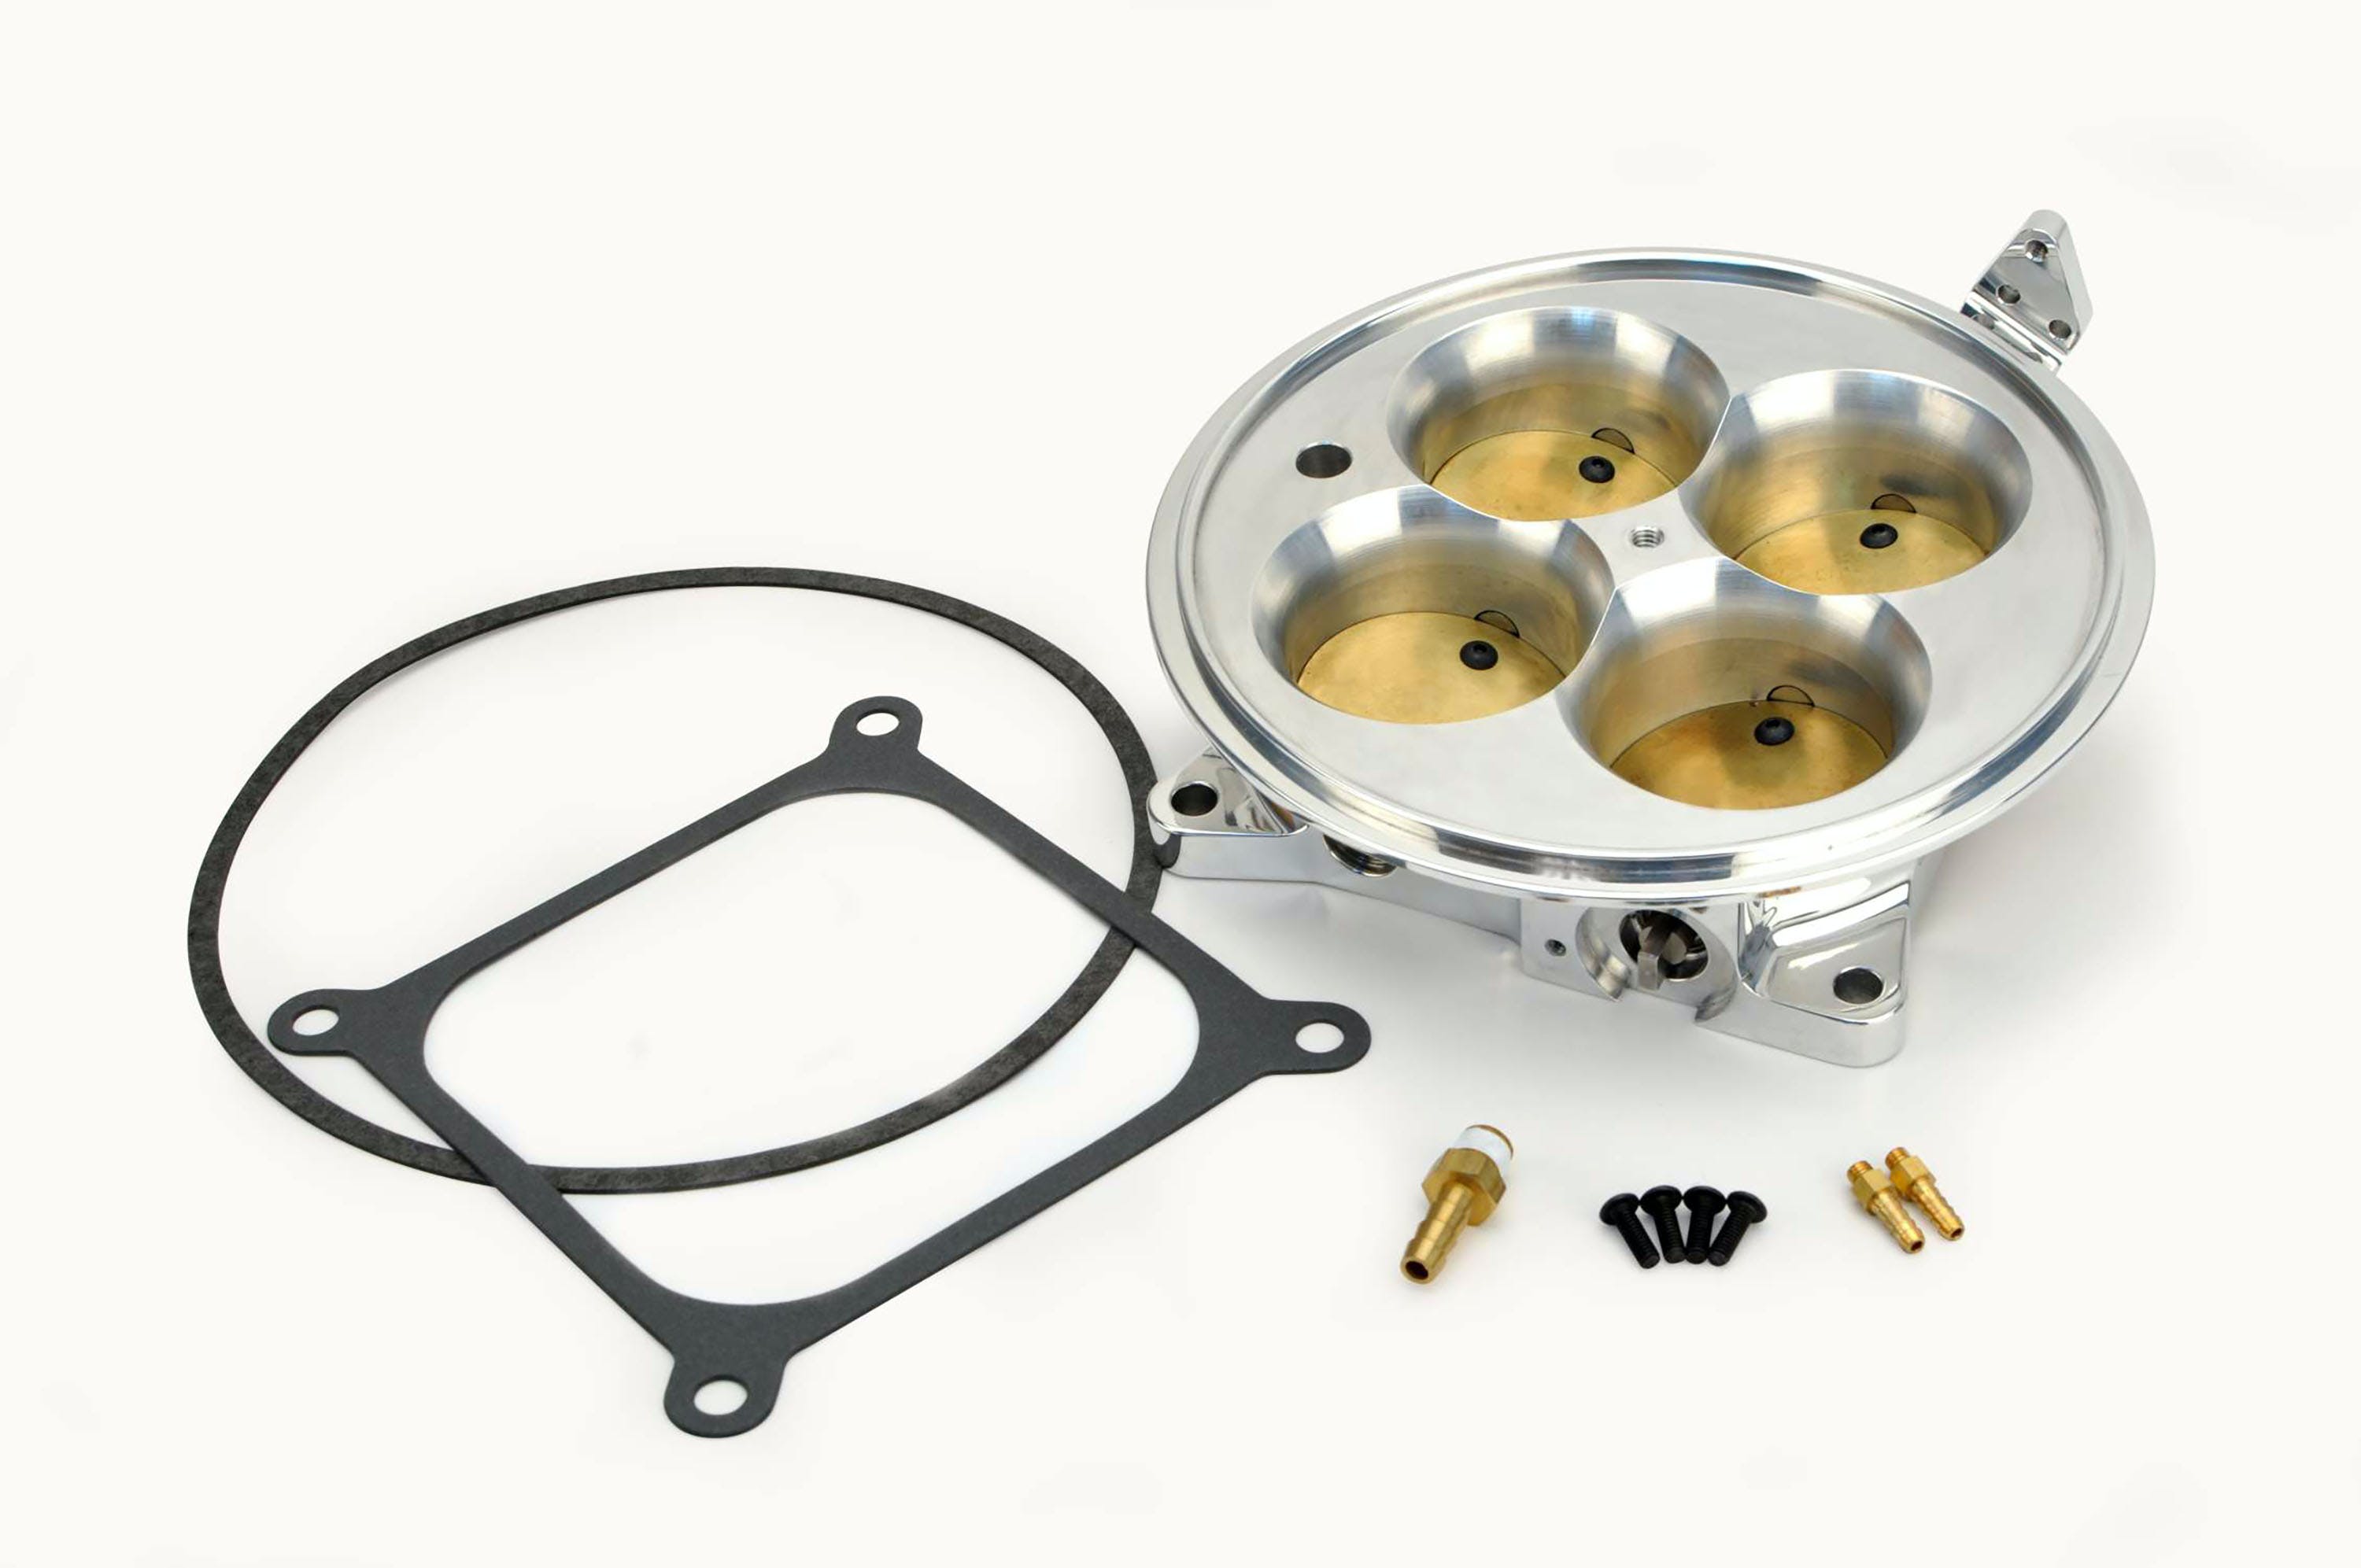 FAST - Fuel Air Spark Technology 307603P Polished 4150 Flange Air Only Throttle Body for Multiport Injection EFI Systems